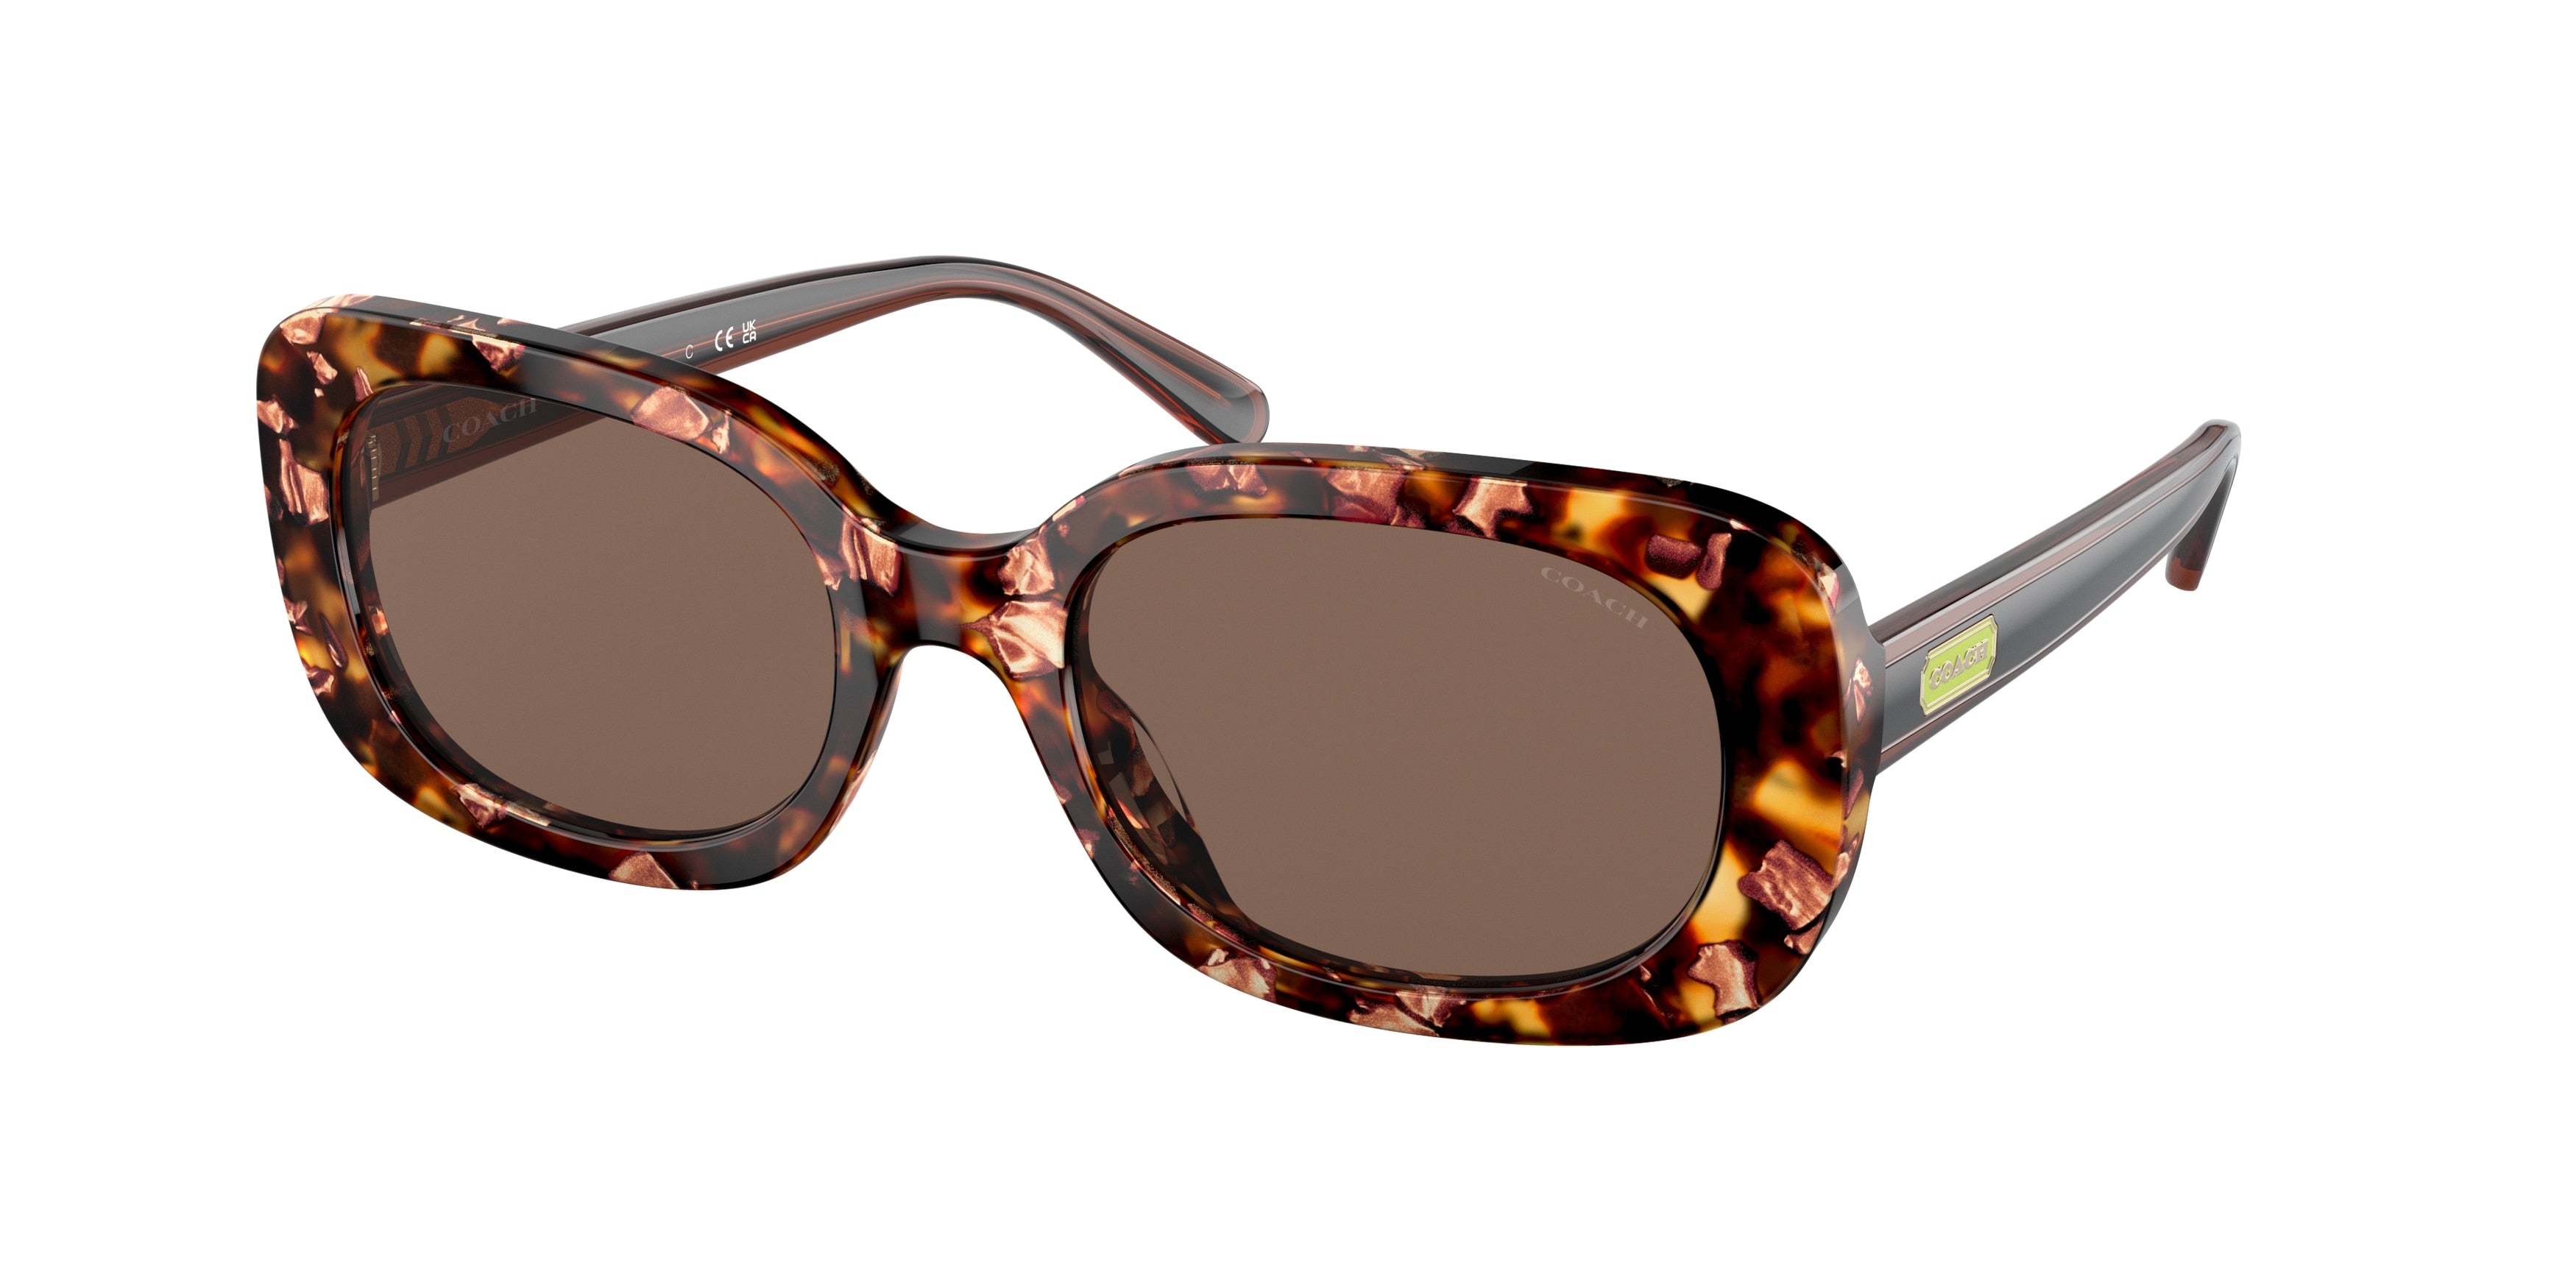 Coach CD868 HC8358F Oval Sunglasses  571173-Pearlescent Amber Tortoise 56-145-20 - Color Map Tortoise